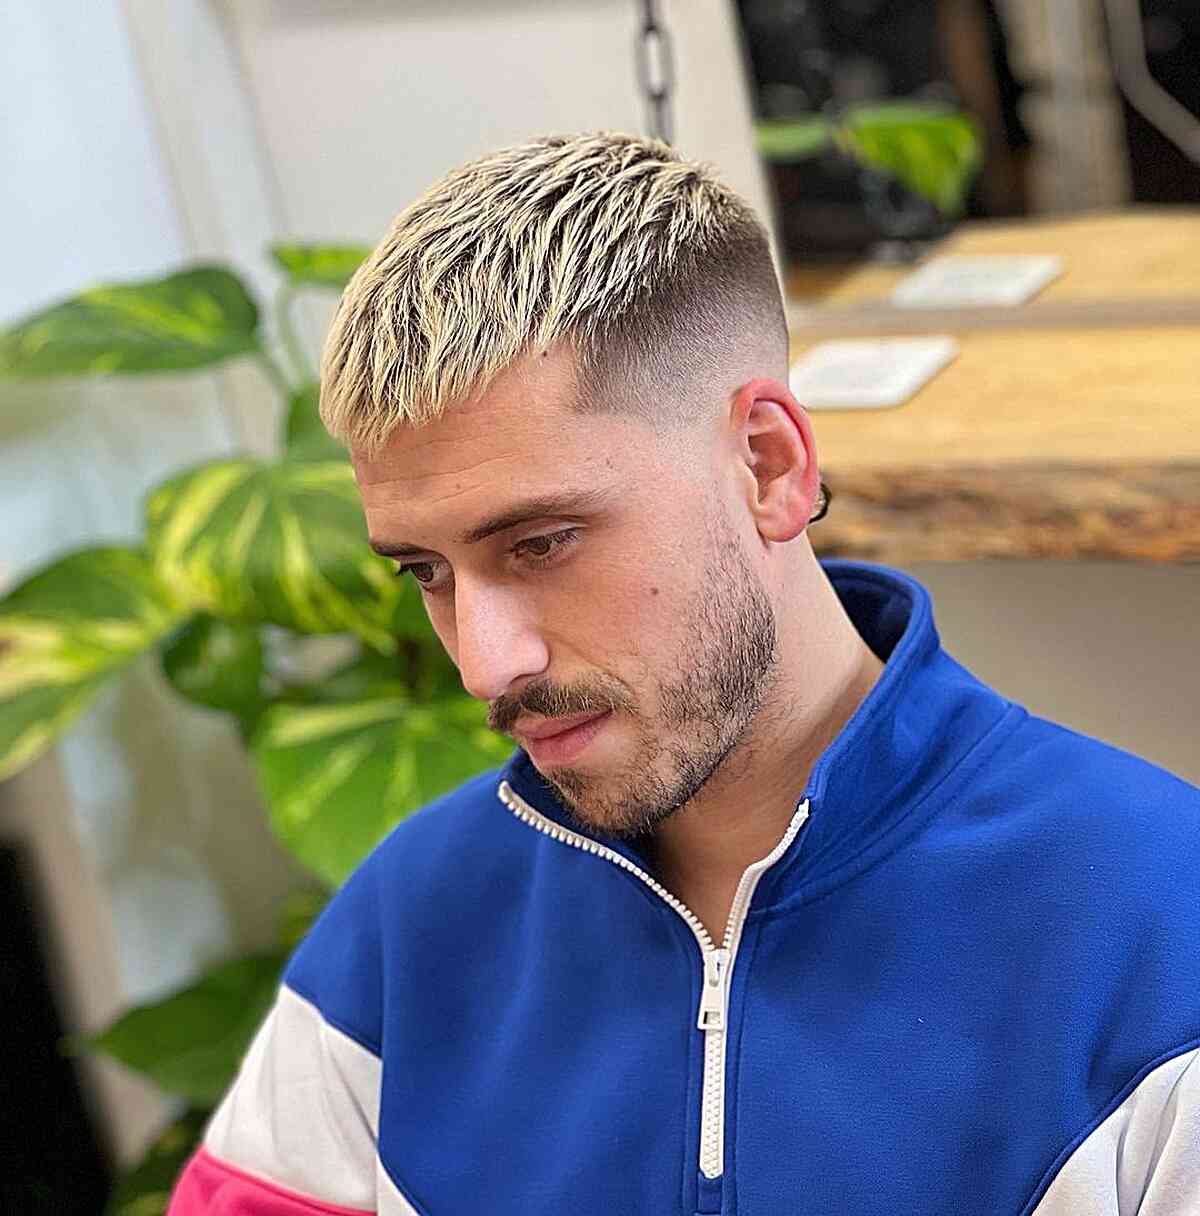 Short Disconnected Crew Cut with a Textured Style on Men's Thin, Blonde Hair